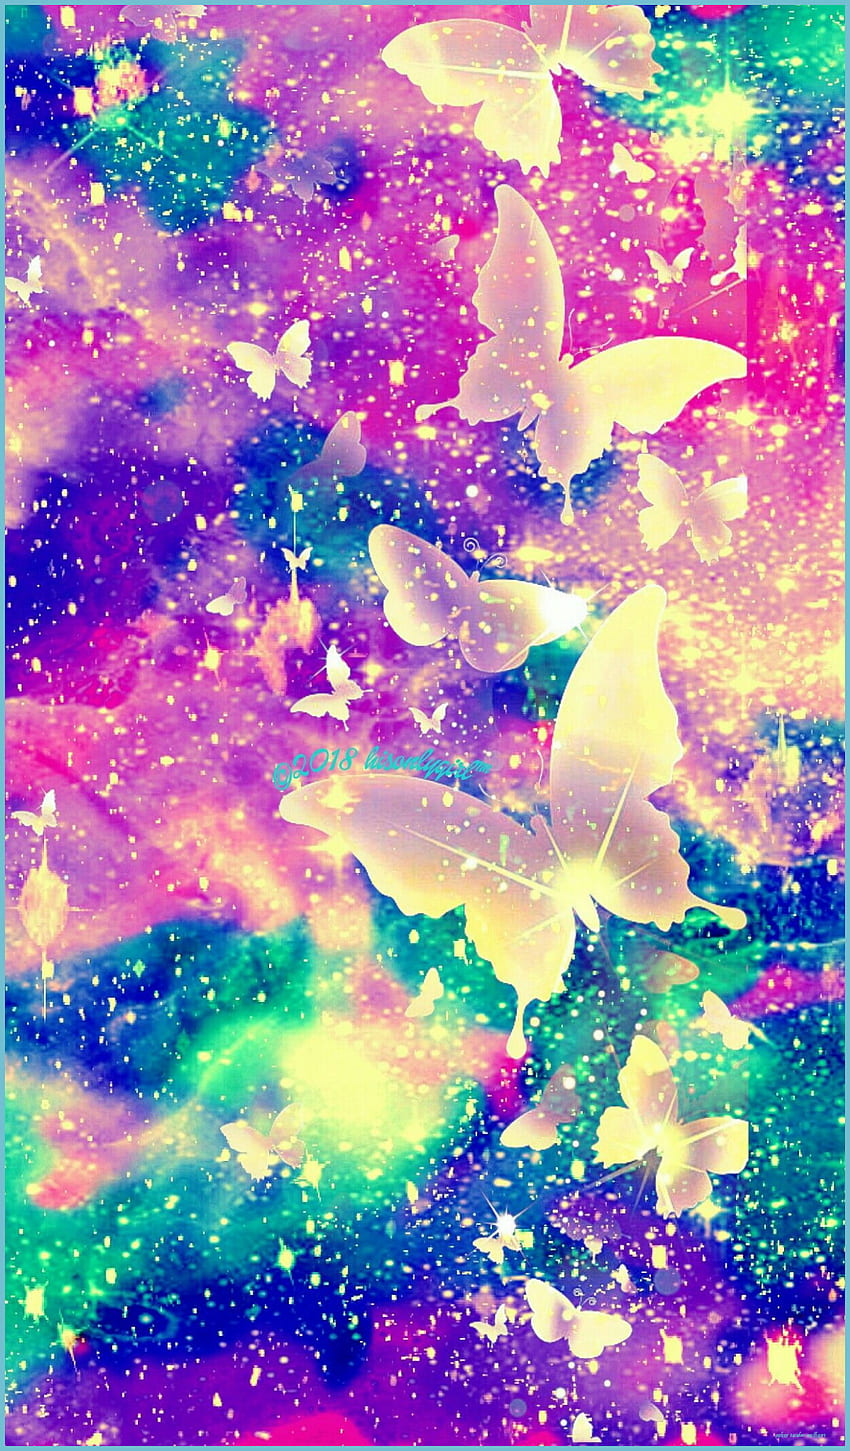 Rainbow Galaxy wallpaper by AbdxllahM  Download on ZEDGE  4134